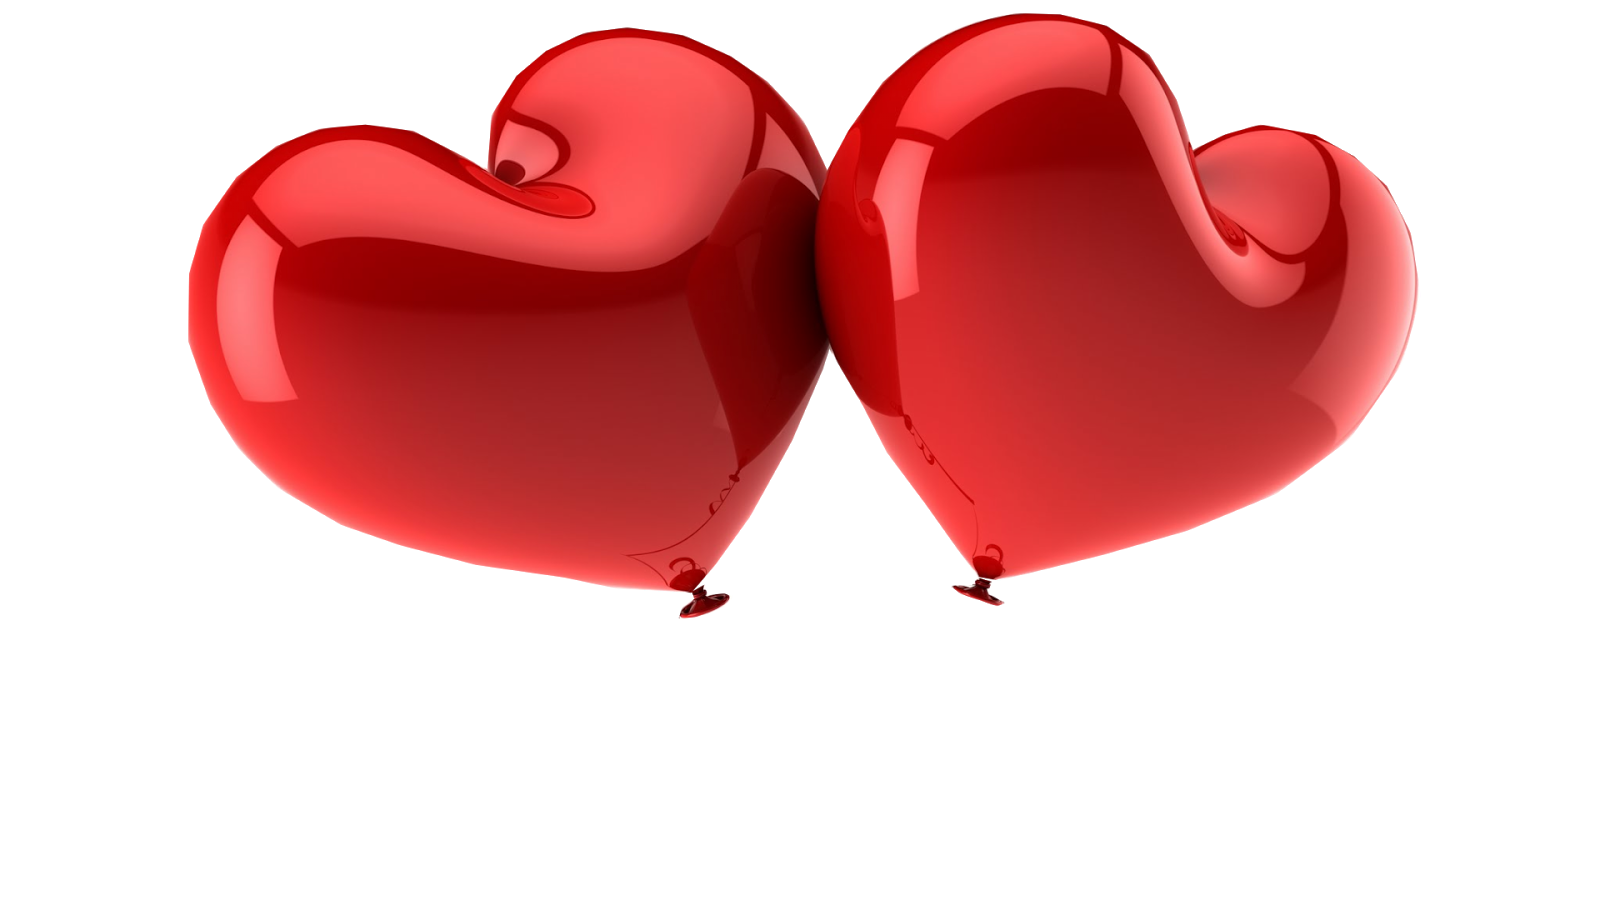 Heart Valentine'S Balloon Day Photography Stock PNG Image